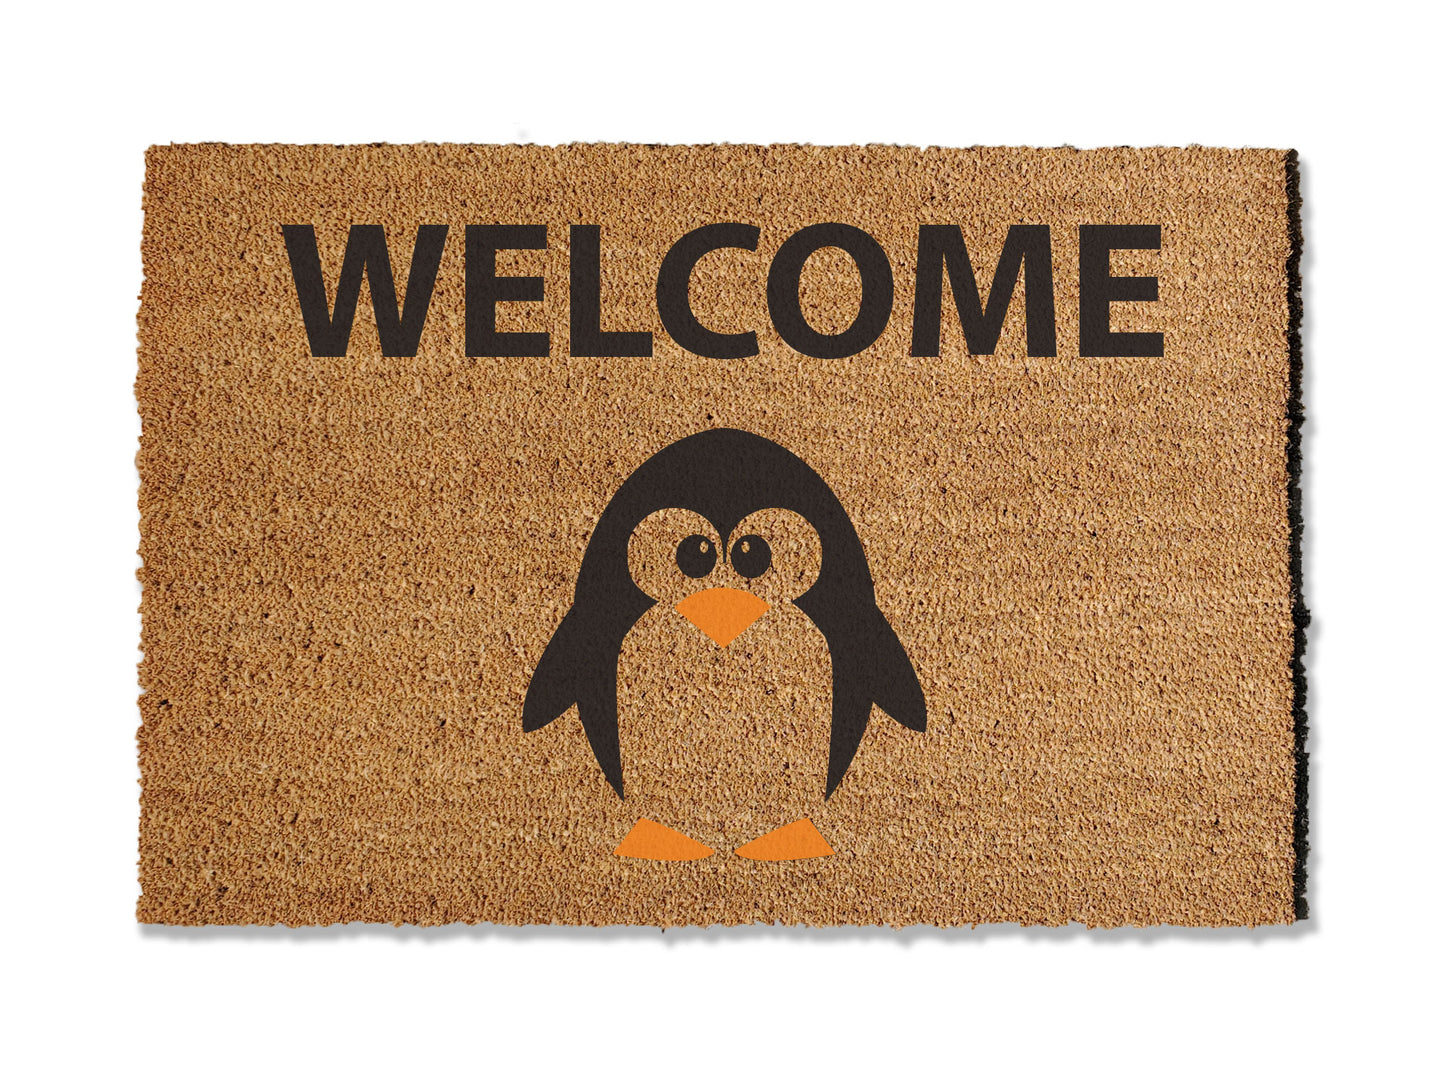 Welcome guests year-round with our coir doormat featuring an adorable penguin design. The perfect addition to your entryway, this charming mat is available in multiple sizes and excels at trapping dirt. Invite a touch of whimsy and functionality to your doorstep with this delightful coir doormat.